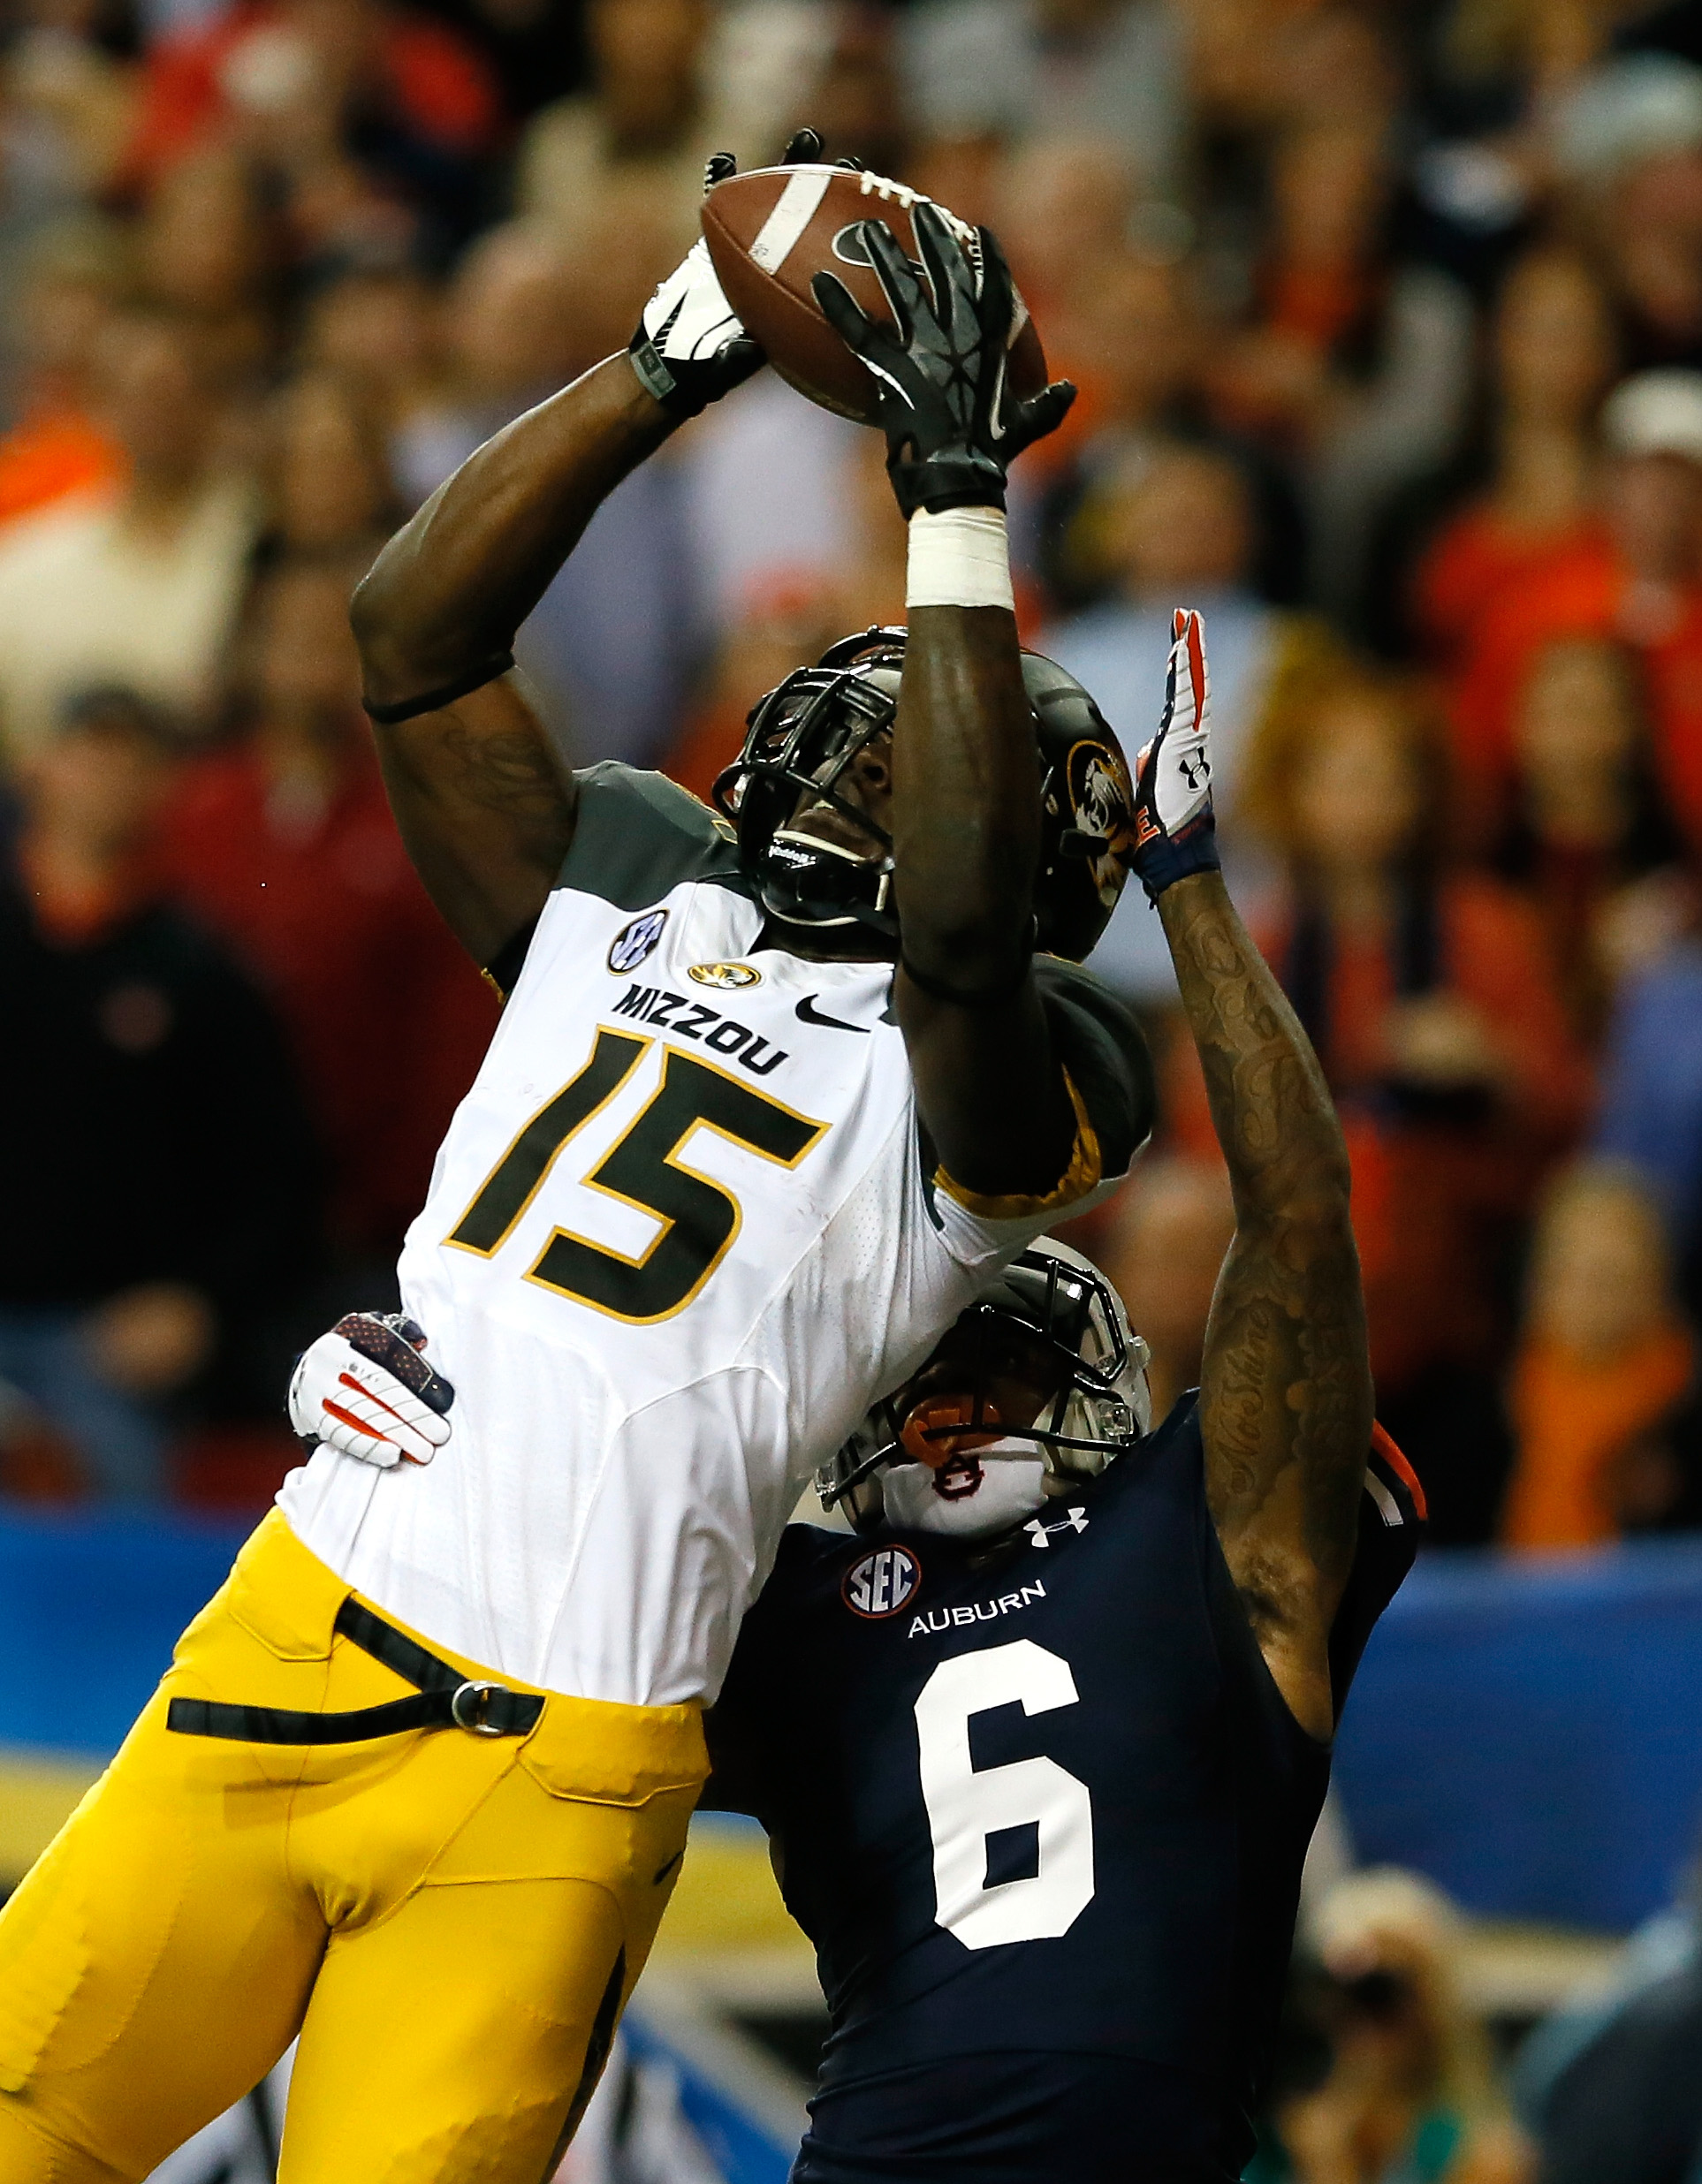 Dorial Green-Beckham #15 of the Missouri Tigers scores a touchdown in the SEC Championship Game on December 7, 2013.  (Photo by Kevin C. Cox/Getty Images)